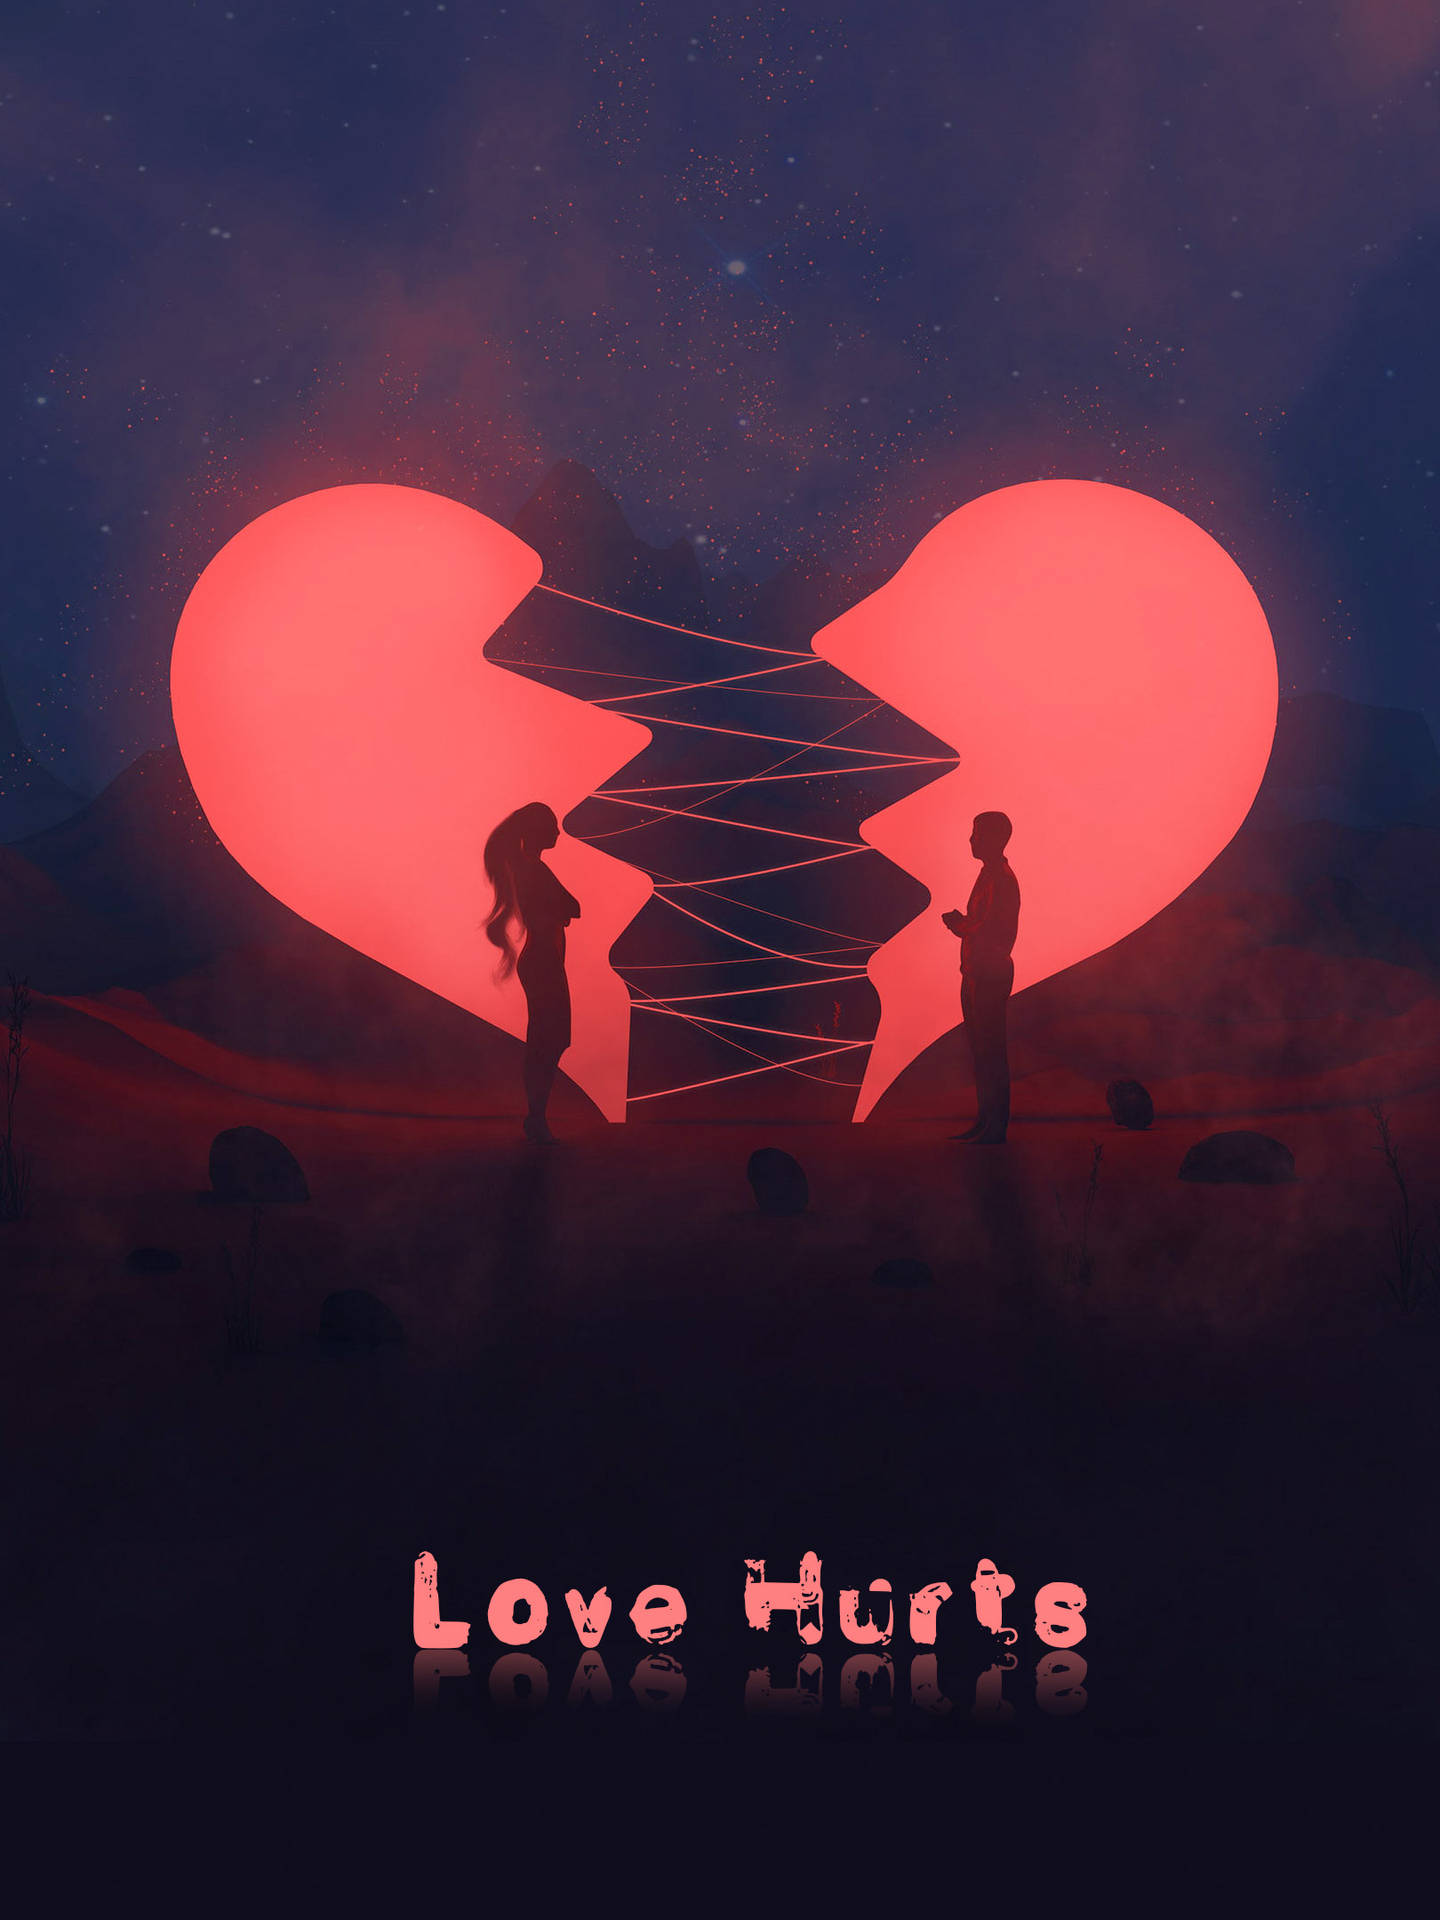 No Love Couple With Broken Heart Background